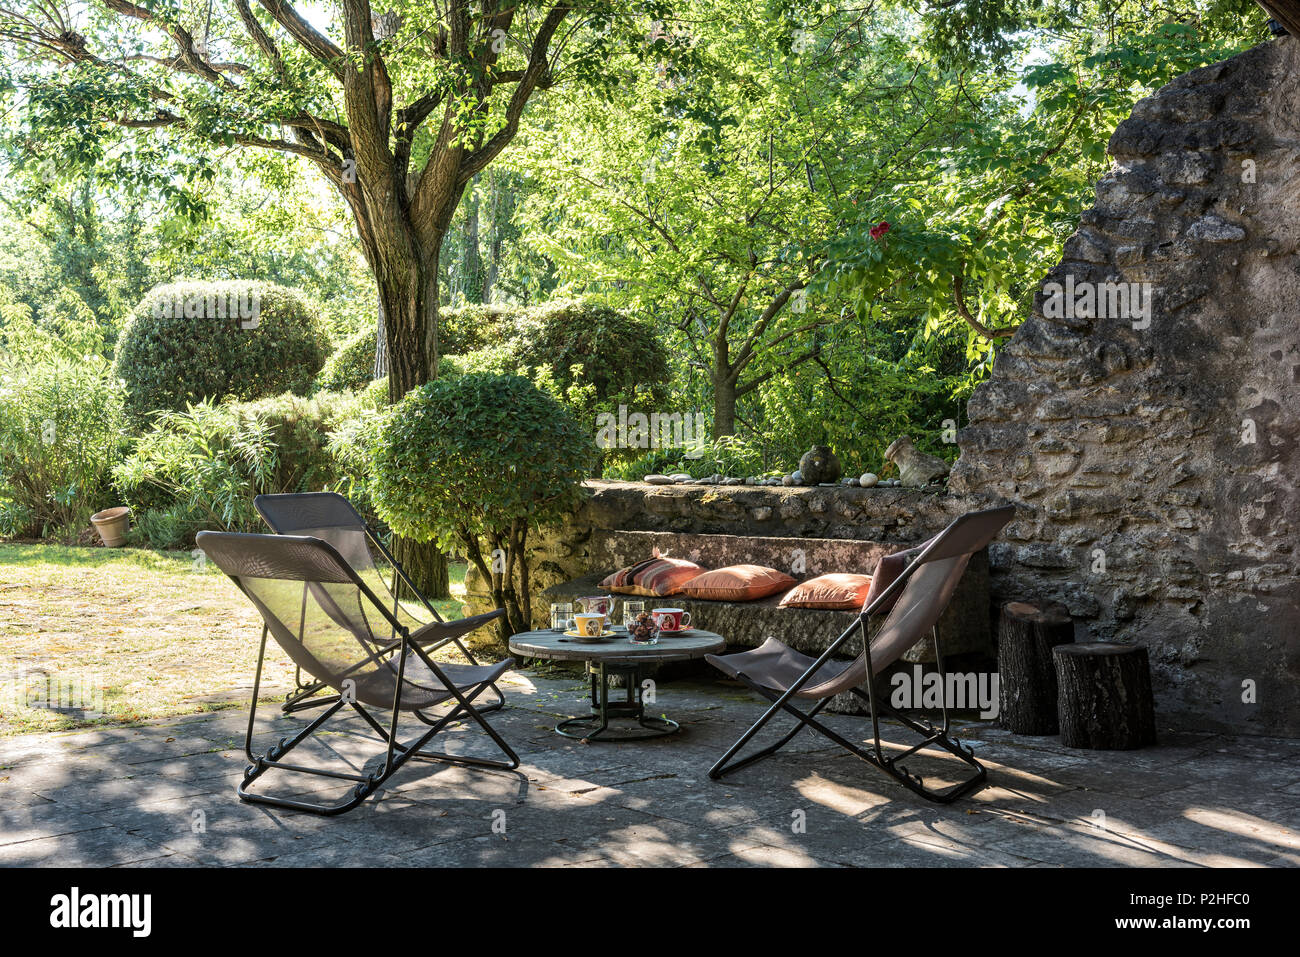 Deck chairs and table in shade of tree in, Luberon. Stock Photo